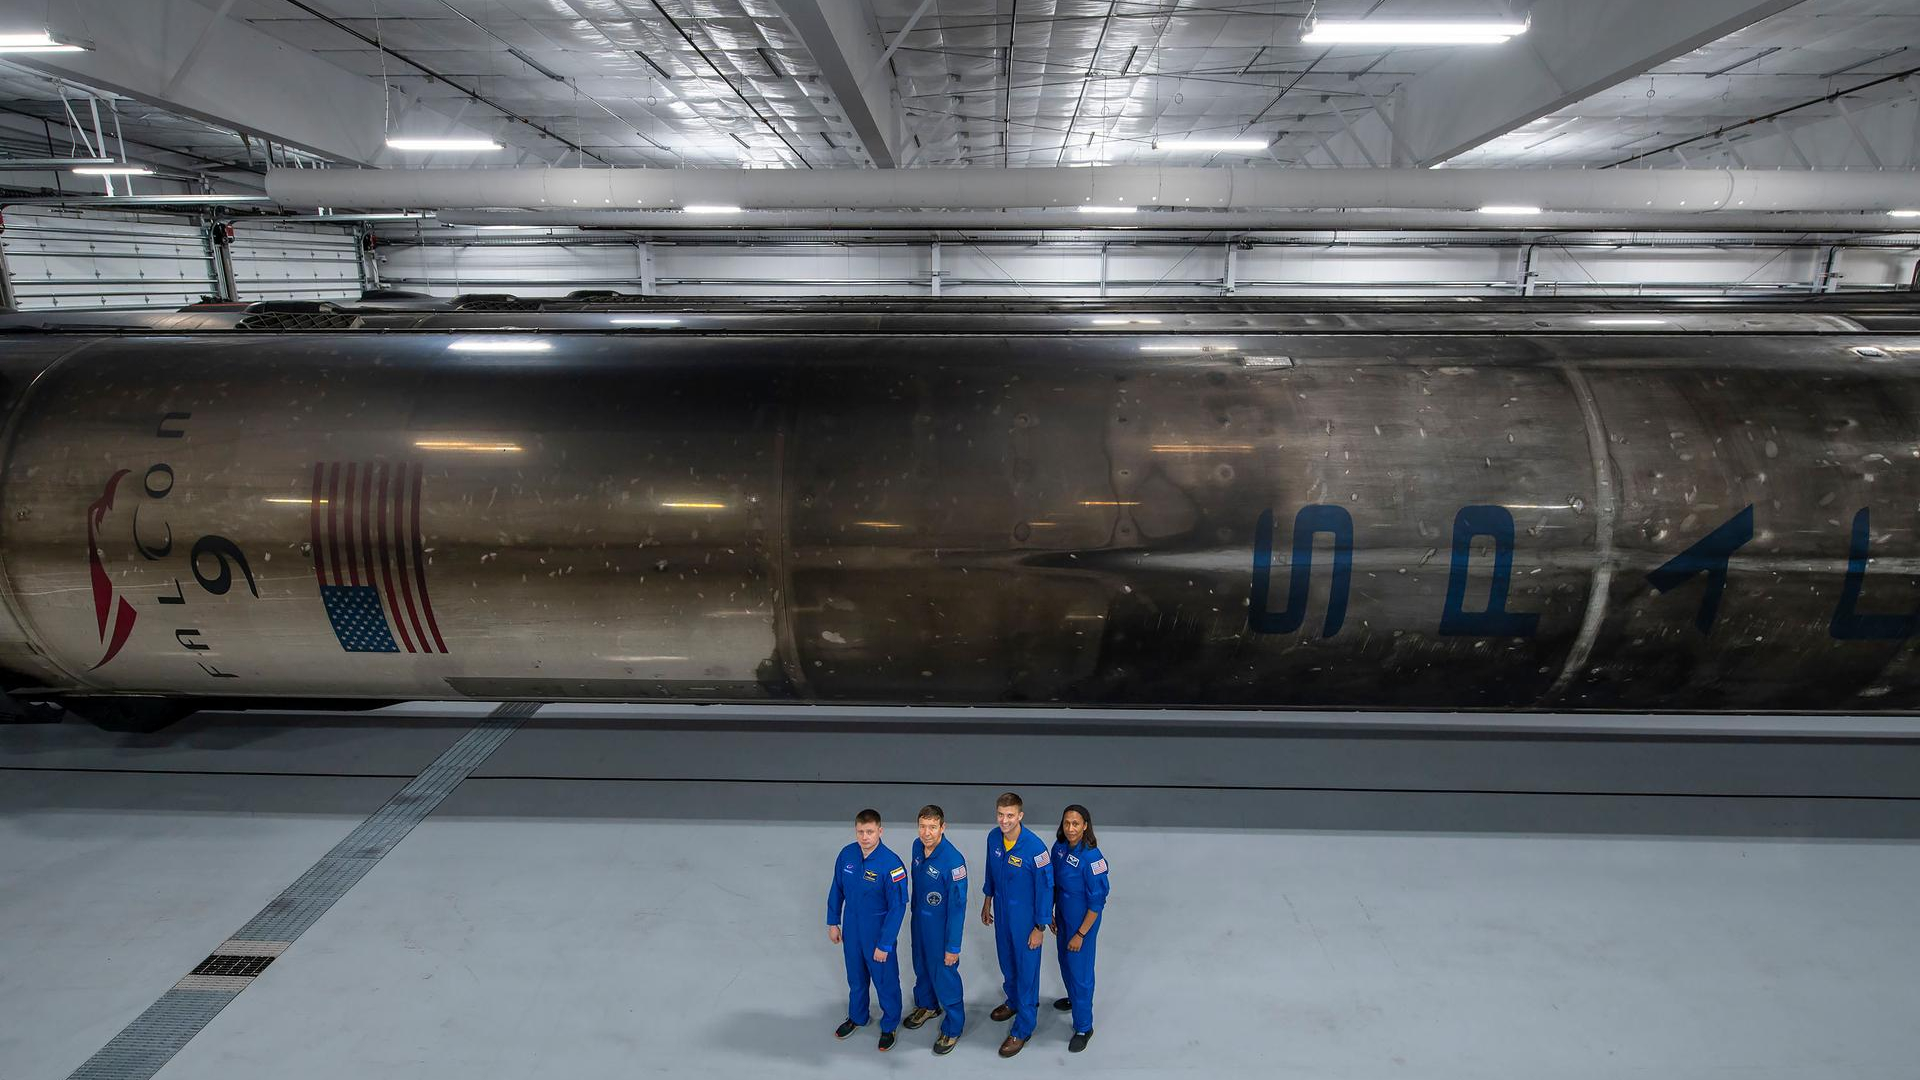 four humans in blue jumpsuits stand in a large white hanger with a relatively low ceiling. Behind them, laid on its side, is a sooty rocket booster, smeared in black from the char returning through earth's atmosphere during previous flights.